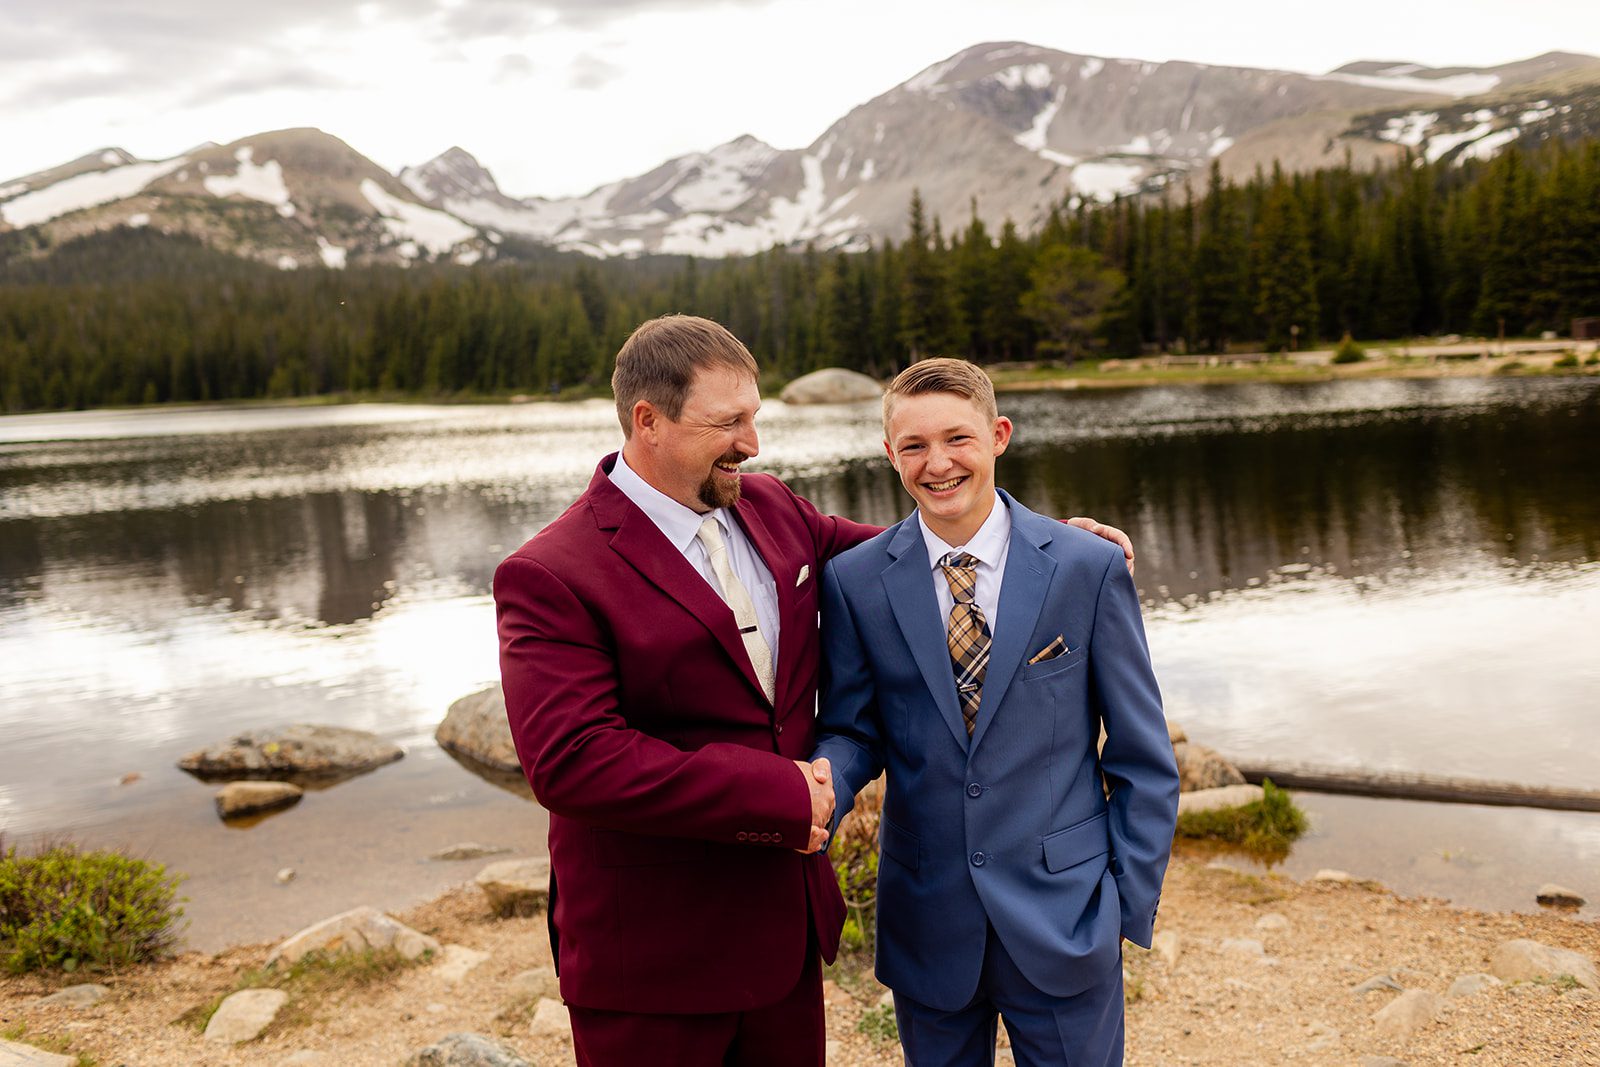 The groom and his son at Brainard Lake for his wedding.